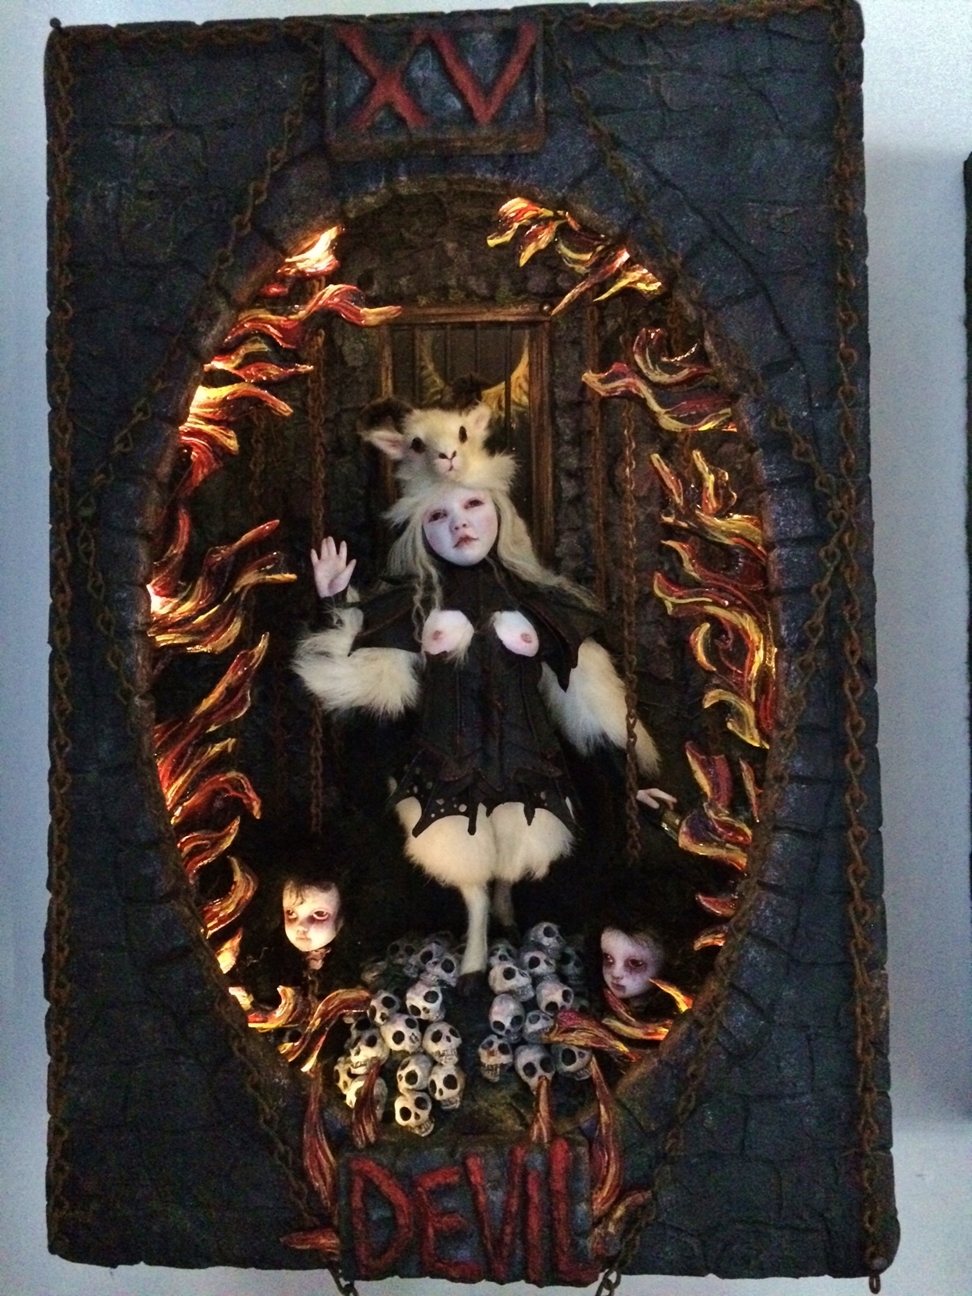 miniature shadowbox diorama with hellscape scene inside a tiny devil doll with a goat headdress and black leather vest surrounded by tiny skulls doll heads and hand painted flames